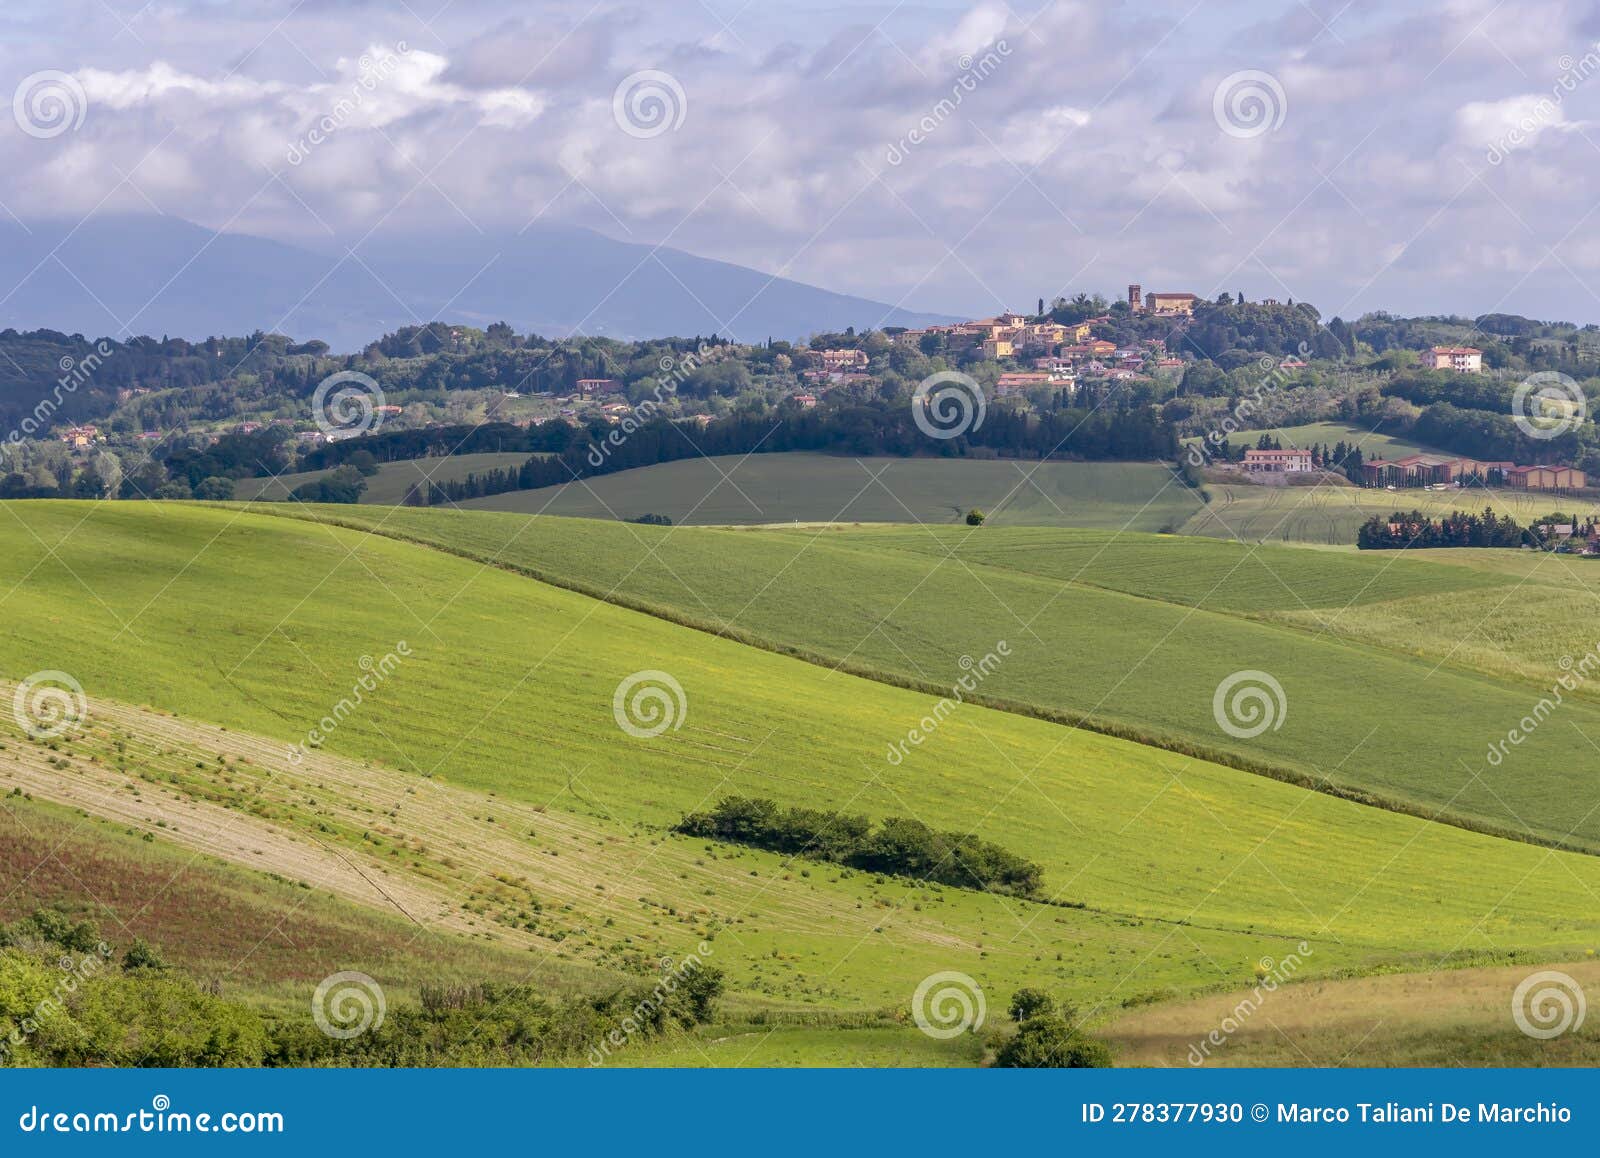 the orciano pisano countryside with lorenzana in the background, on a sunny spring day, pisa, italy